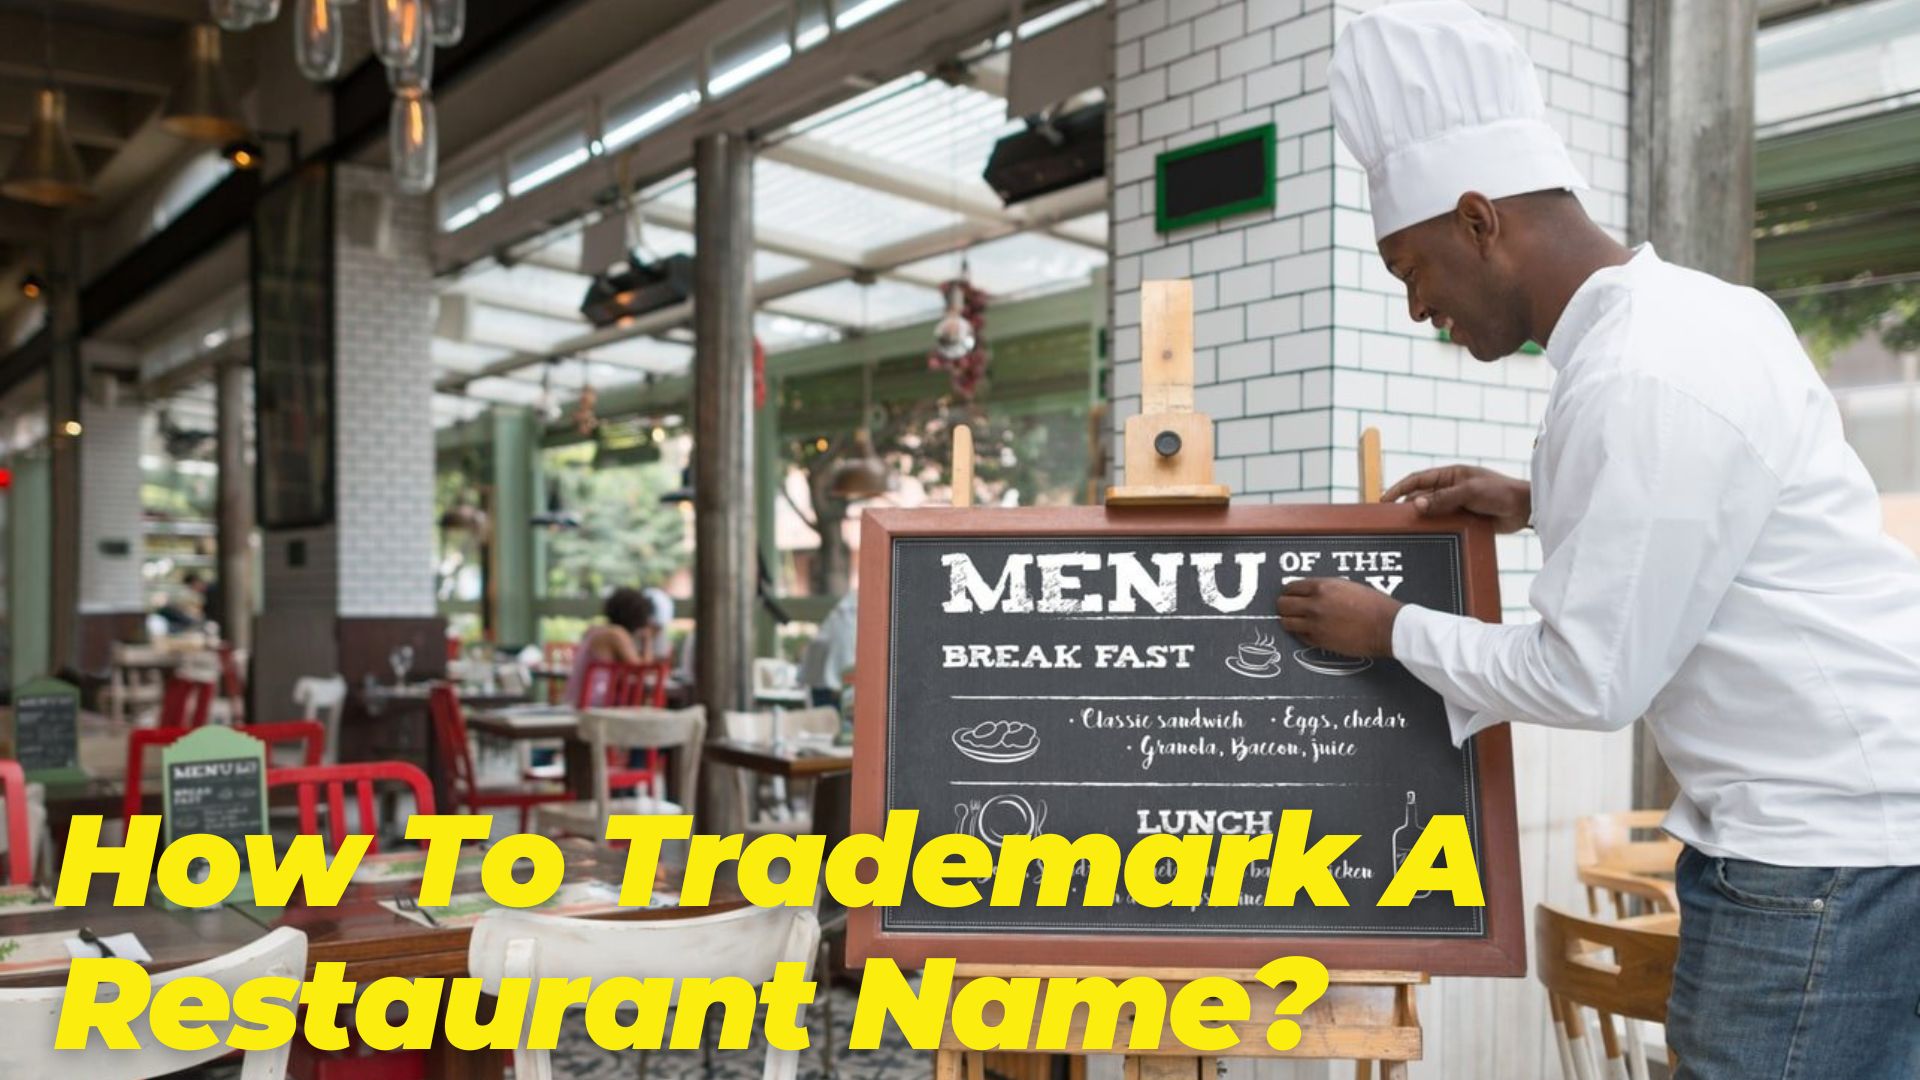 How To Trademark A Restaurant Name?